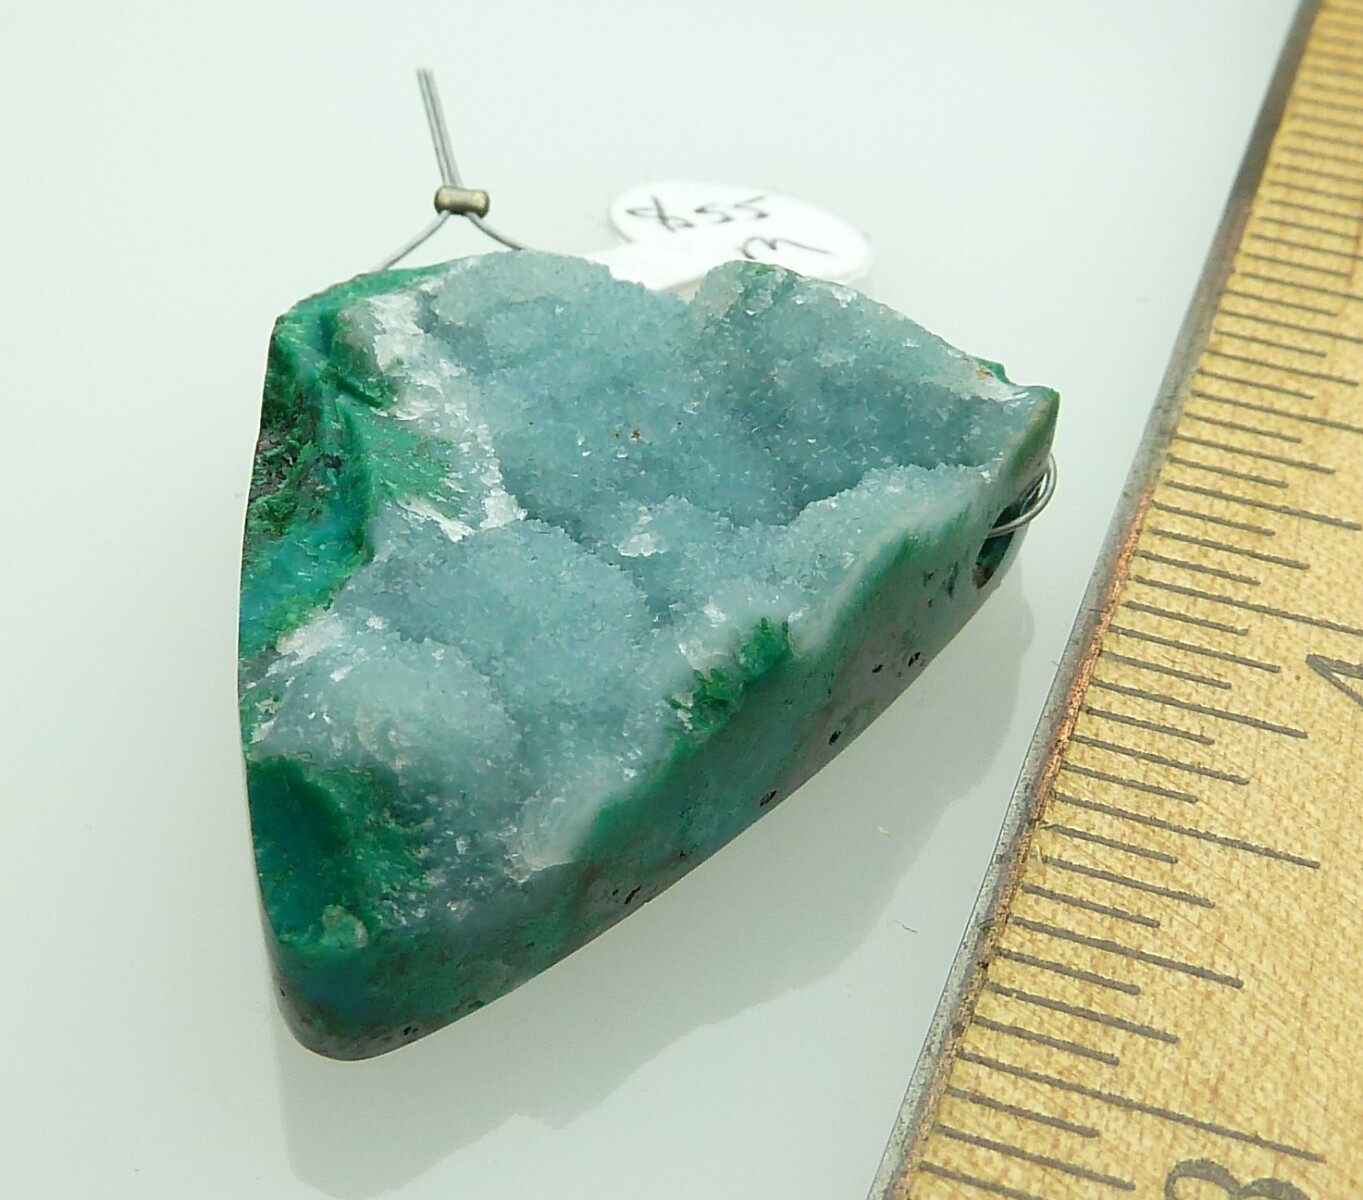 Scaled image P1010803.JPG: Item #Chryso2, Price $55.00 Same pendant different view. Handcut designer Chrysocolla and druzy quartz pendant bead. The druzy is a natural coating on top of the malalchite and chrysocolla. All sides except the top are polished. Bead is 37mm long by 31 mm wide at the top. Bead is drilled through the widest part of the stone. Drill hole size is about 2.5 mm. All this stone needs is a bail or leather to make a beautiful pendant.� 